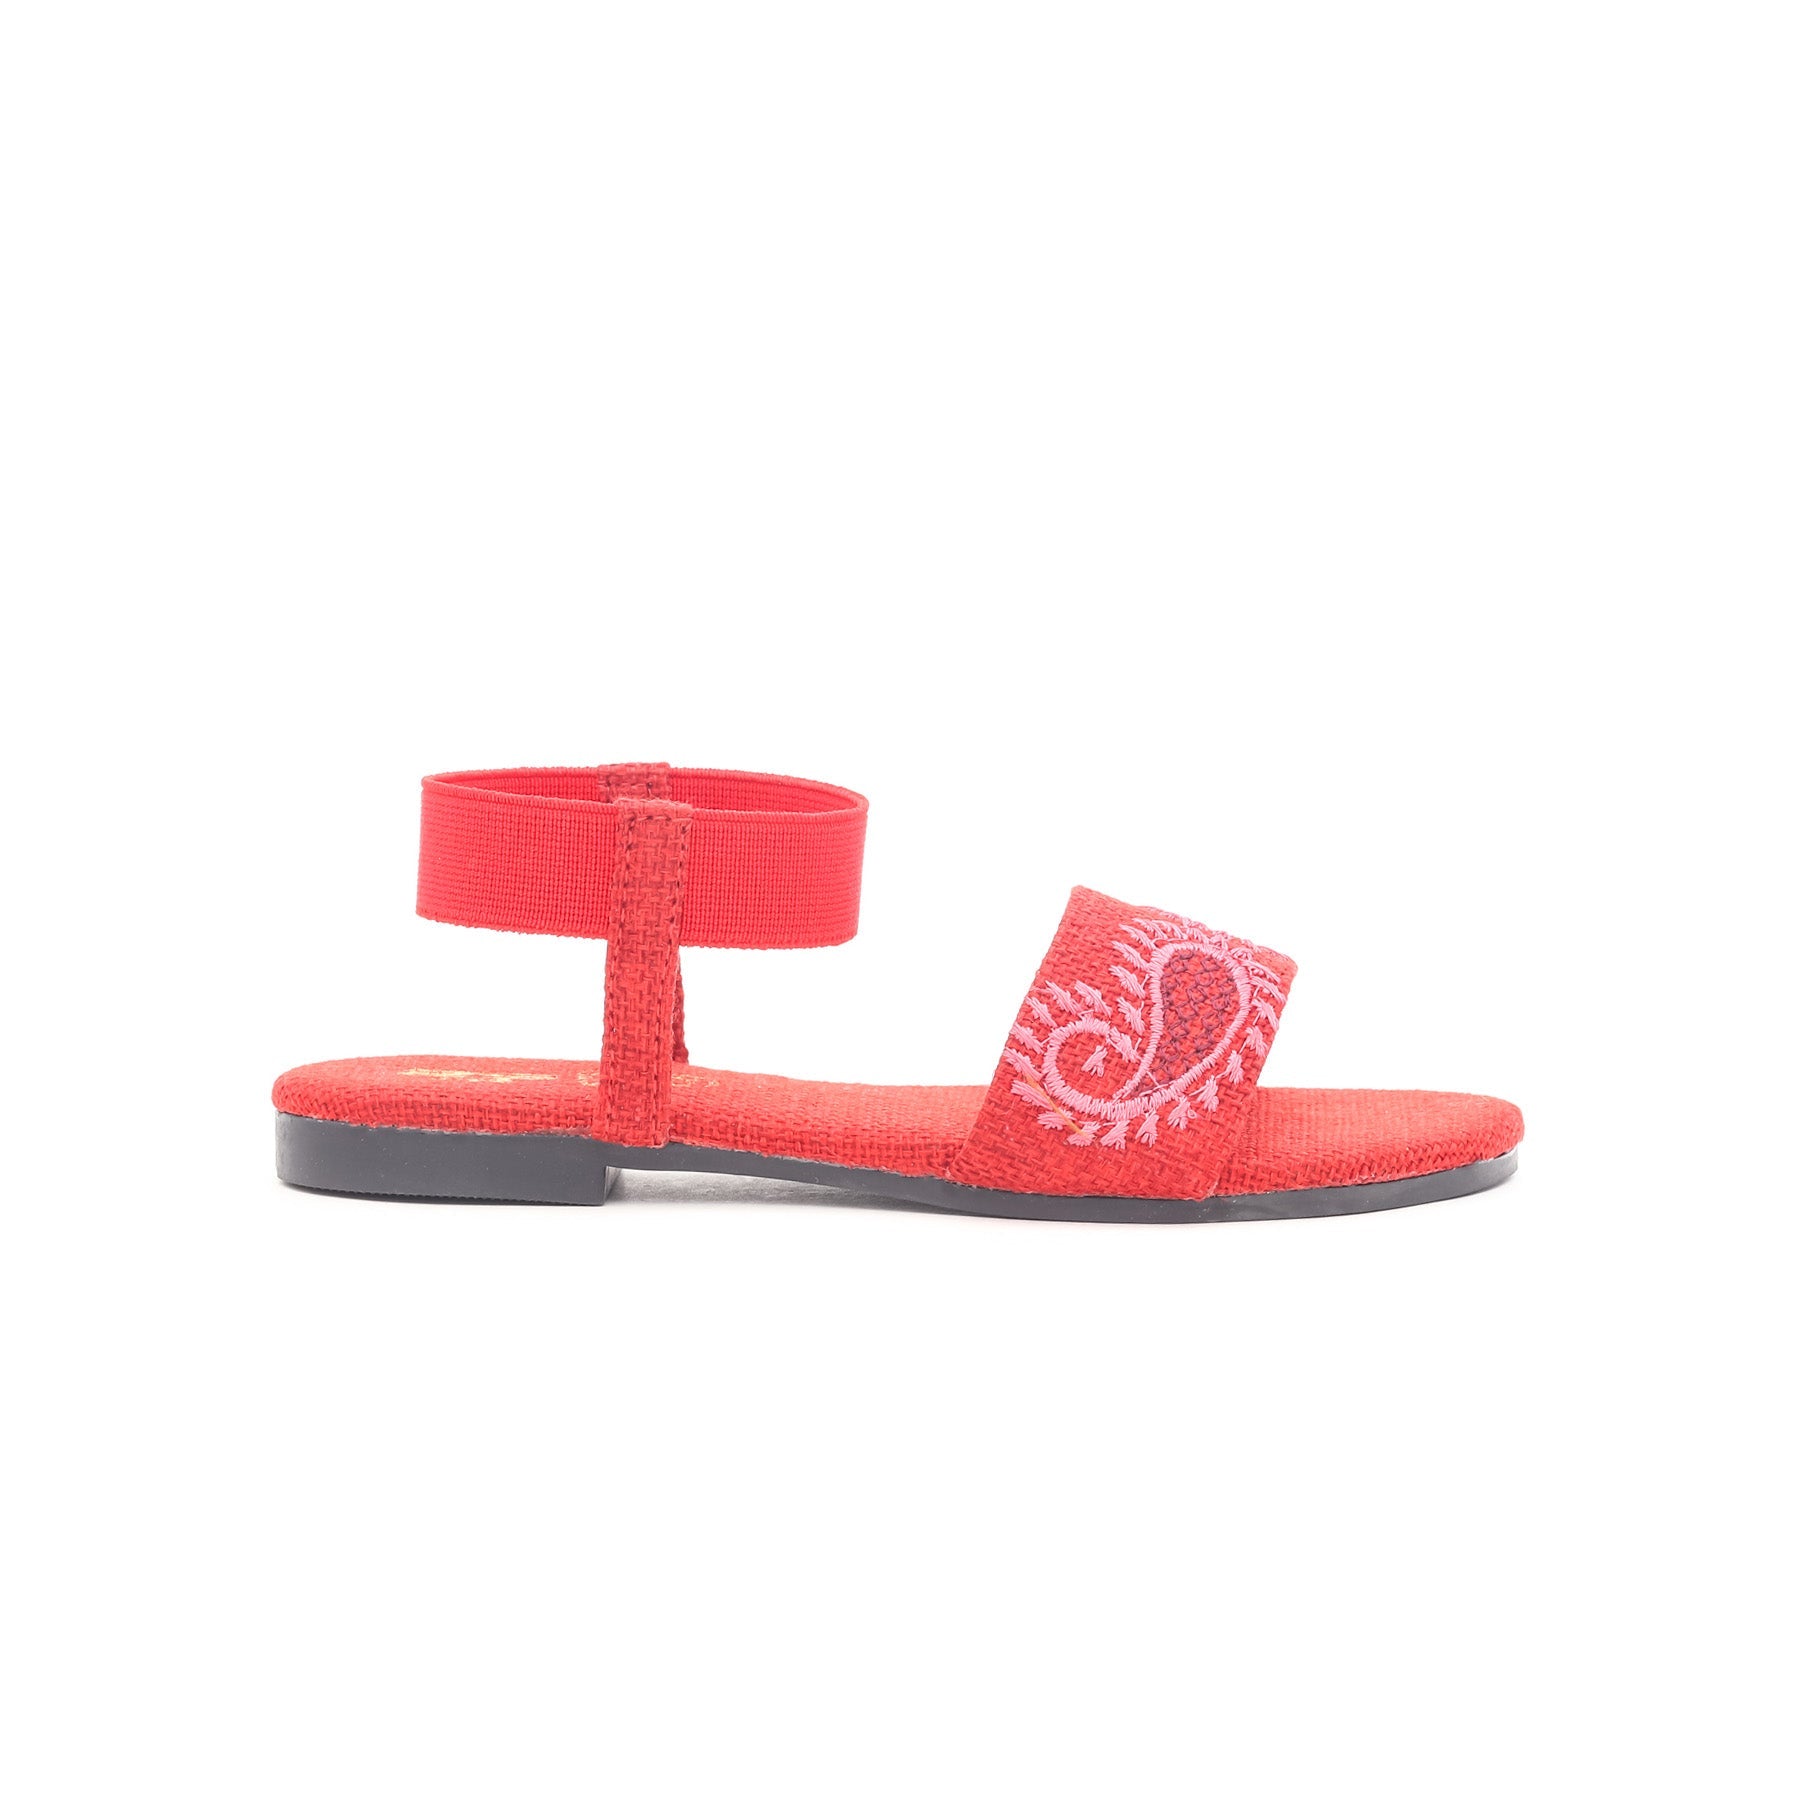 Girls Red Casual Sandal KD7553